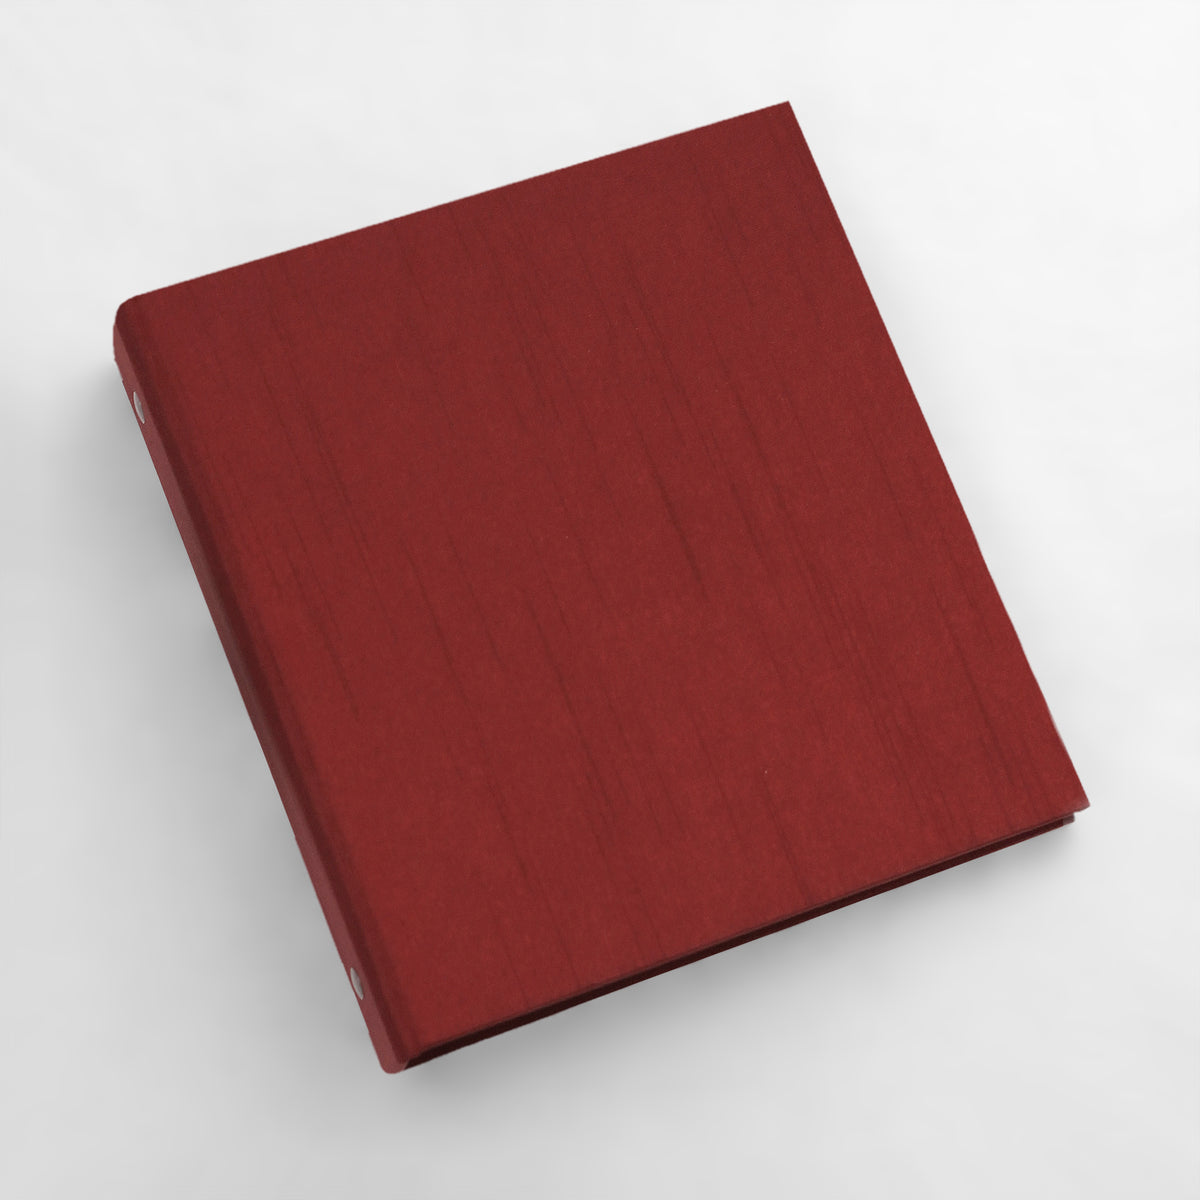 Medium Photo Binder For 4x6 Photos | Cover: Garnet Silk | Available Personalized